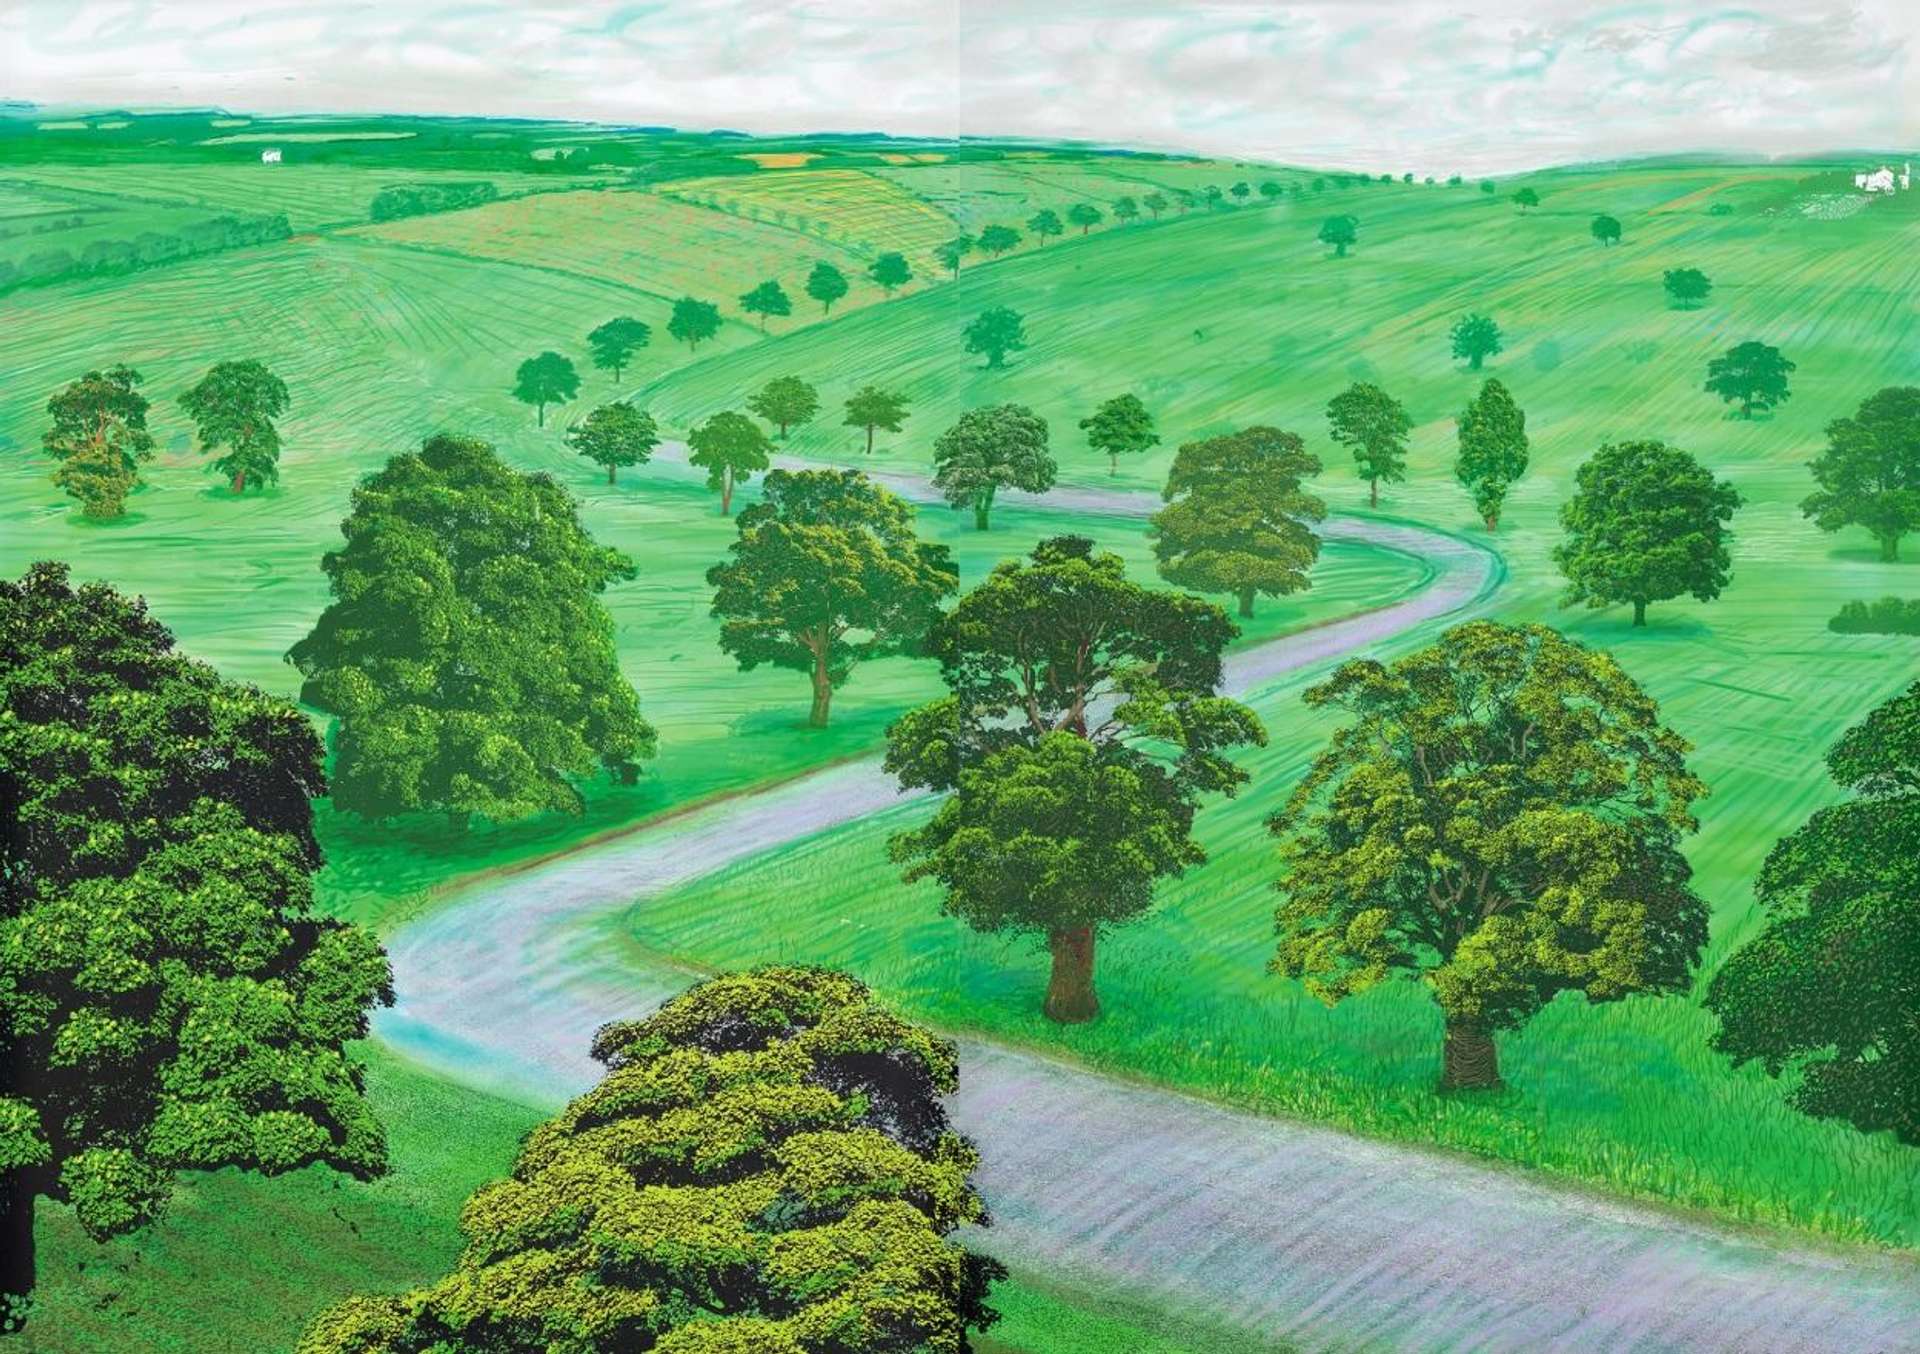 10 Facts About David Hockney's iPad Drawings